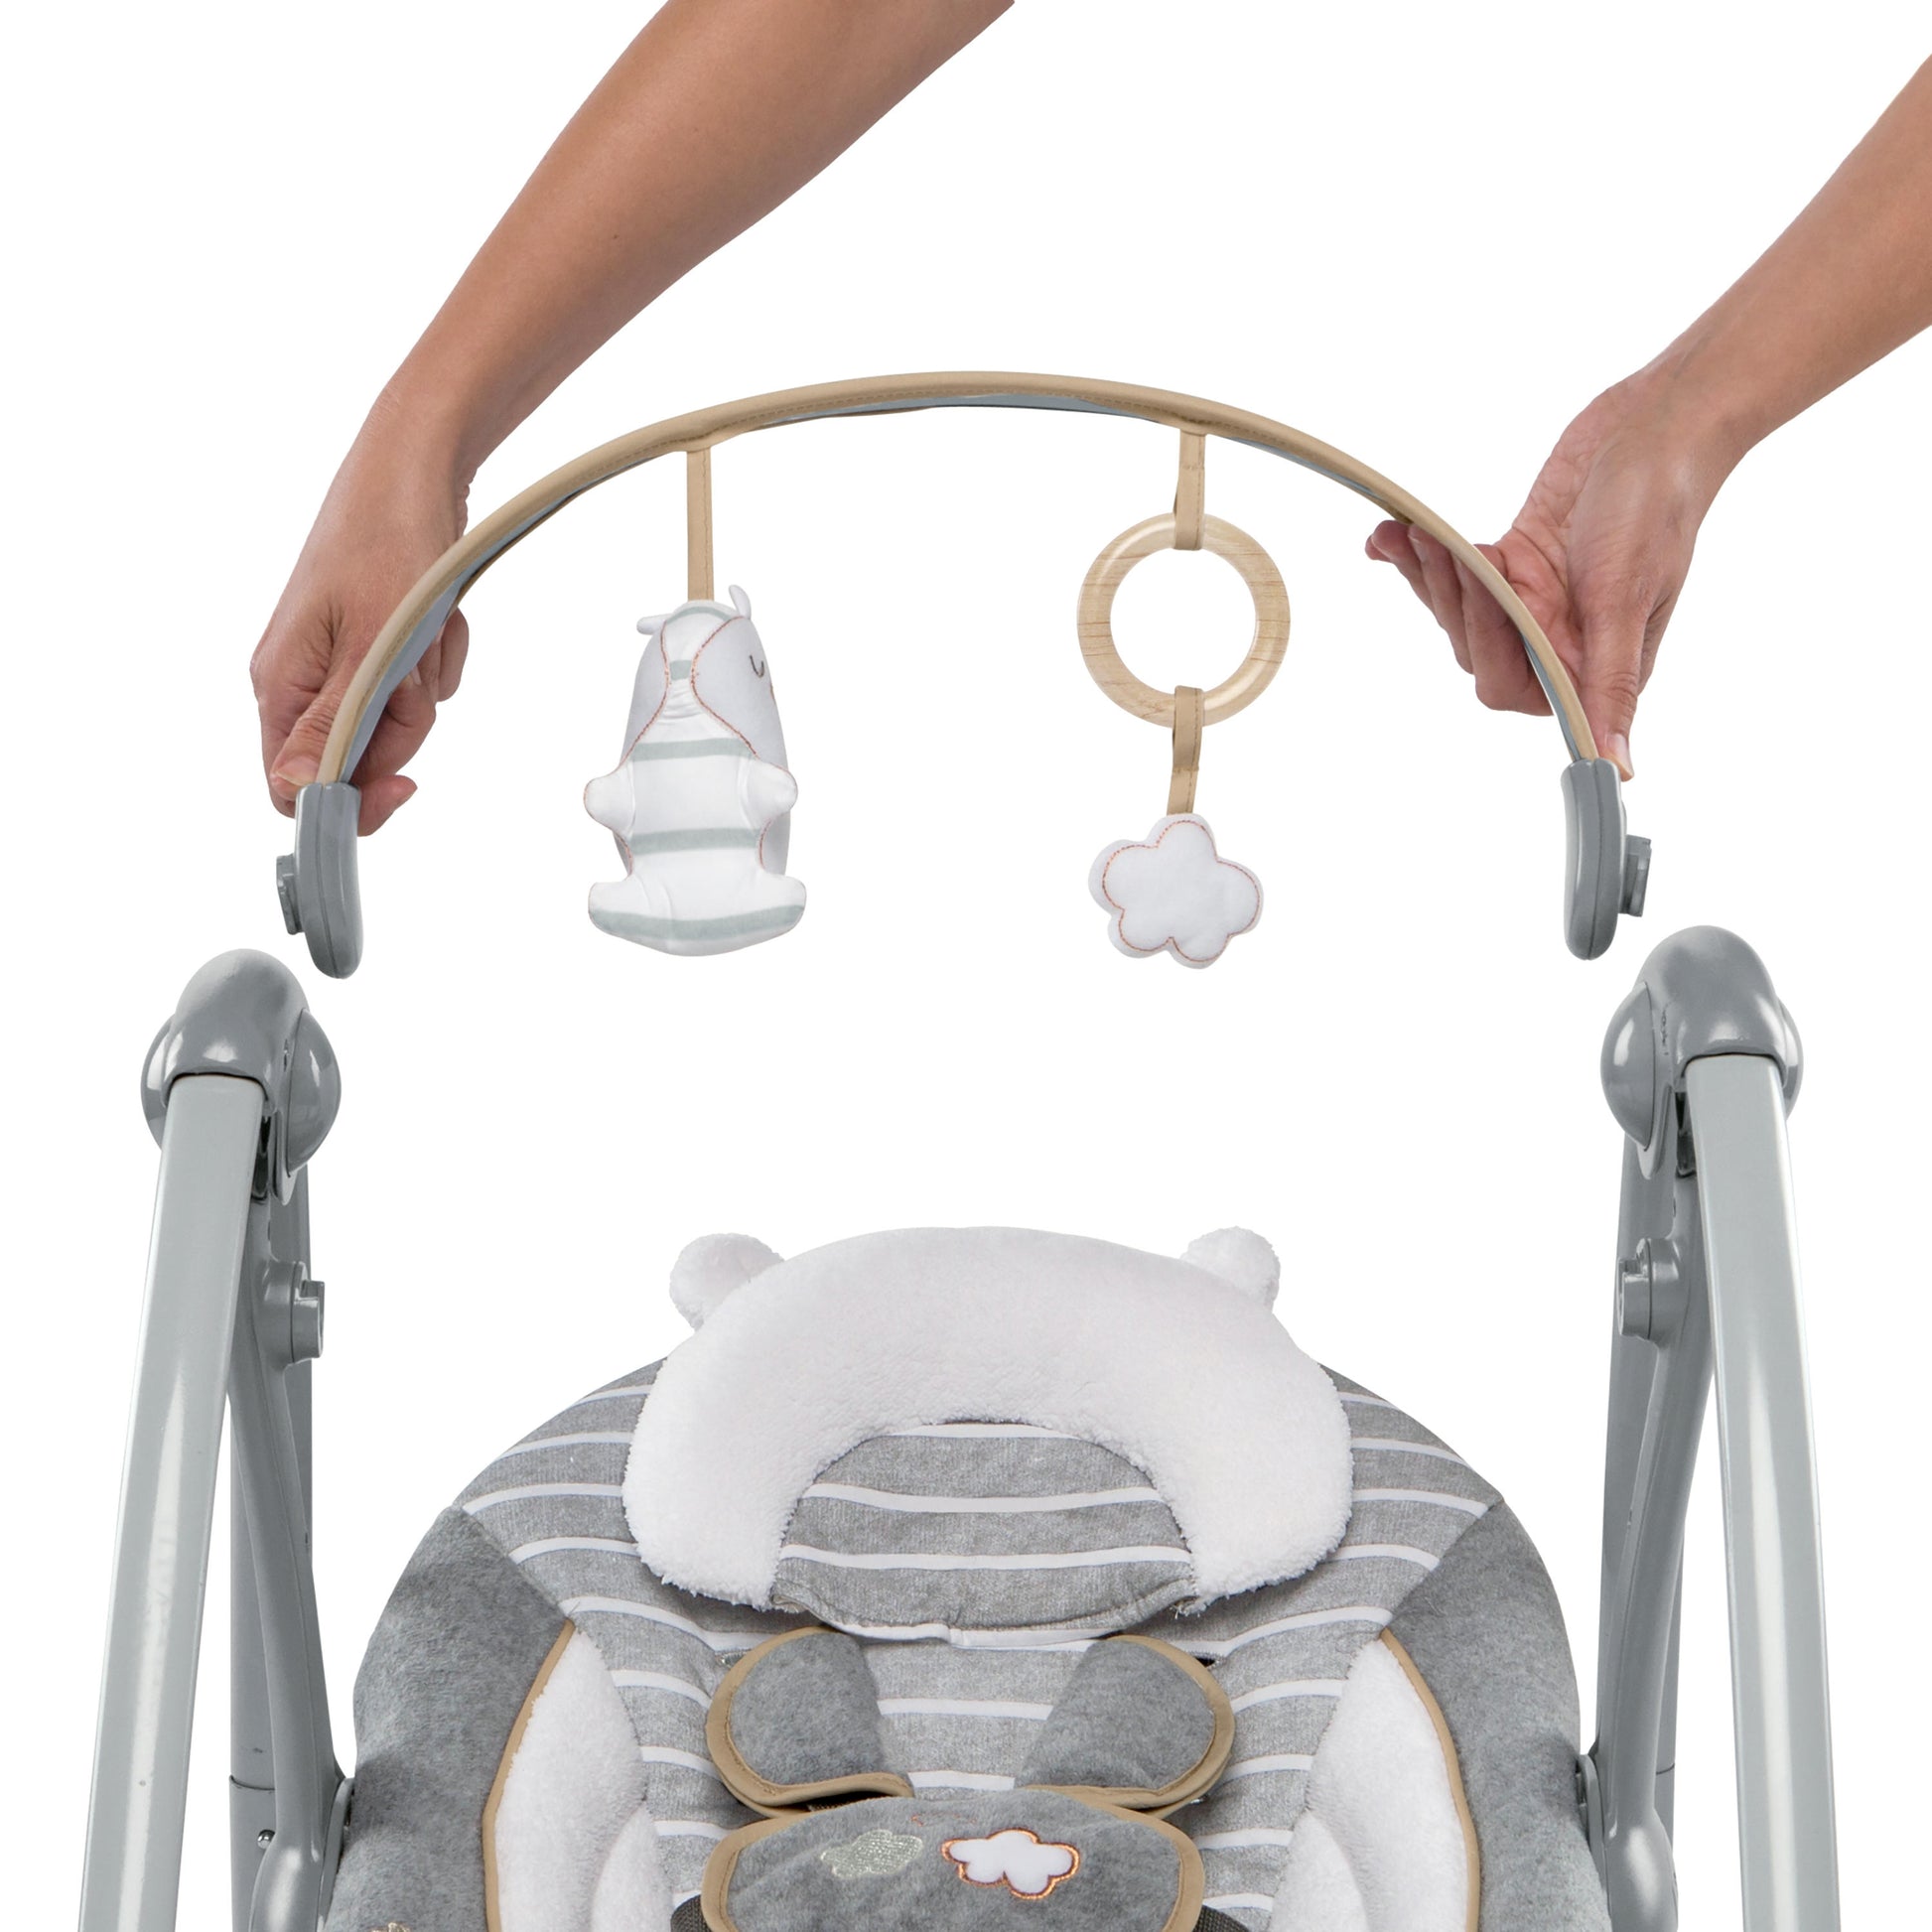 Ingenuity Boutique Collection Swing N Go Portable Swing